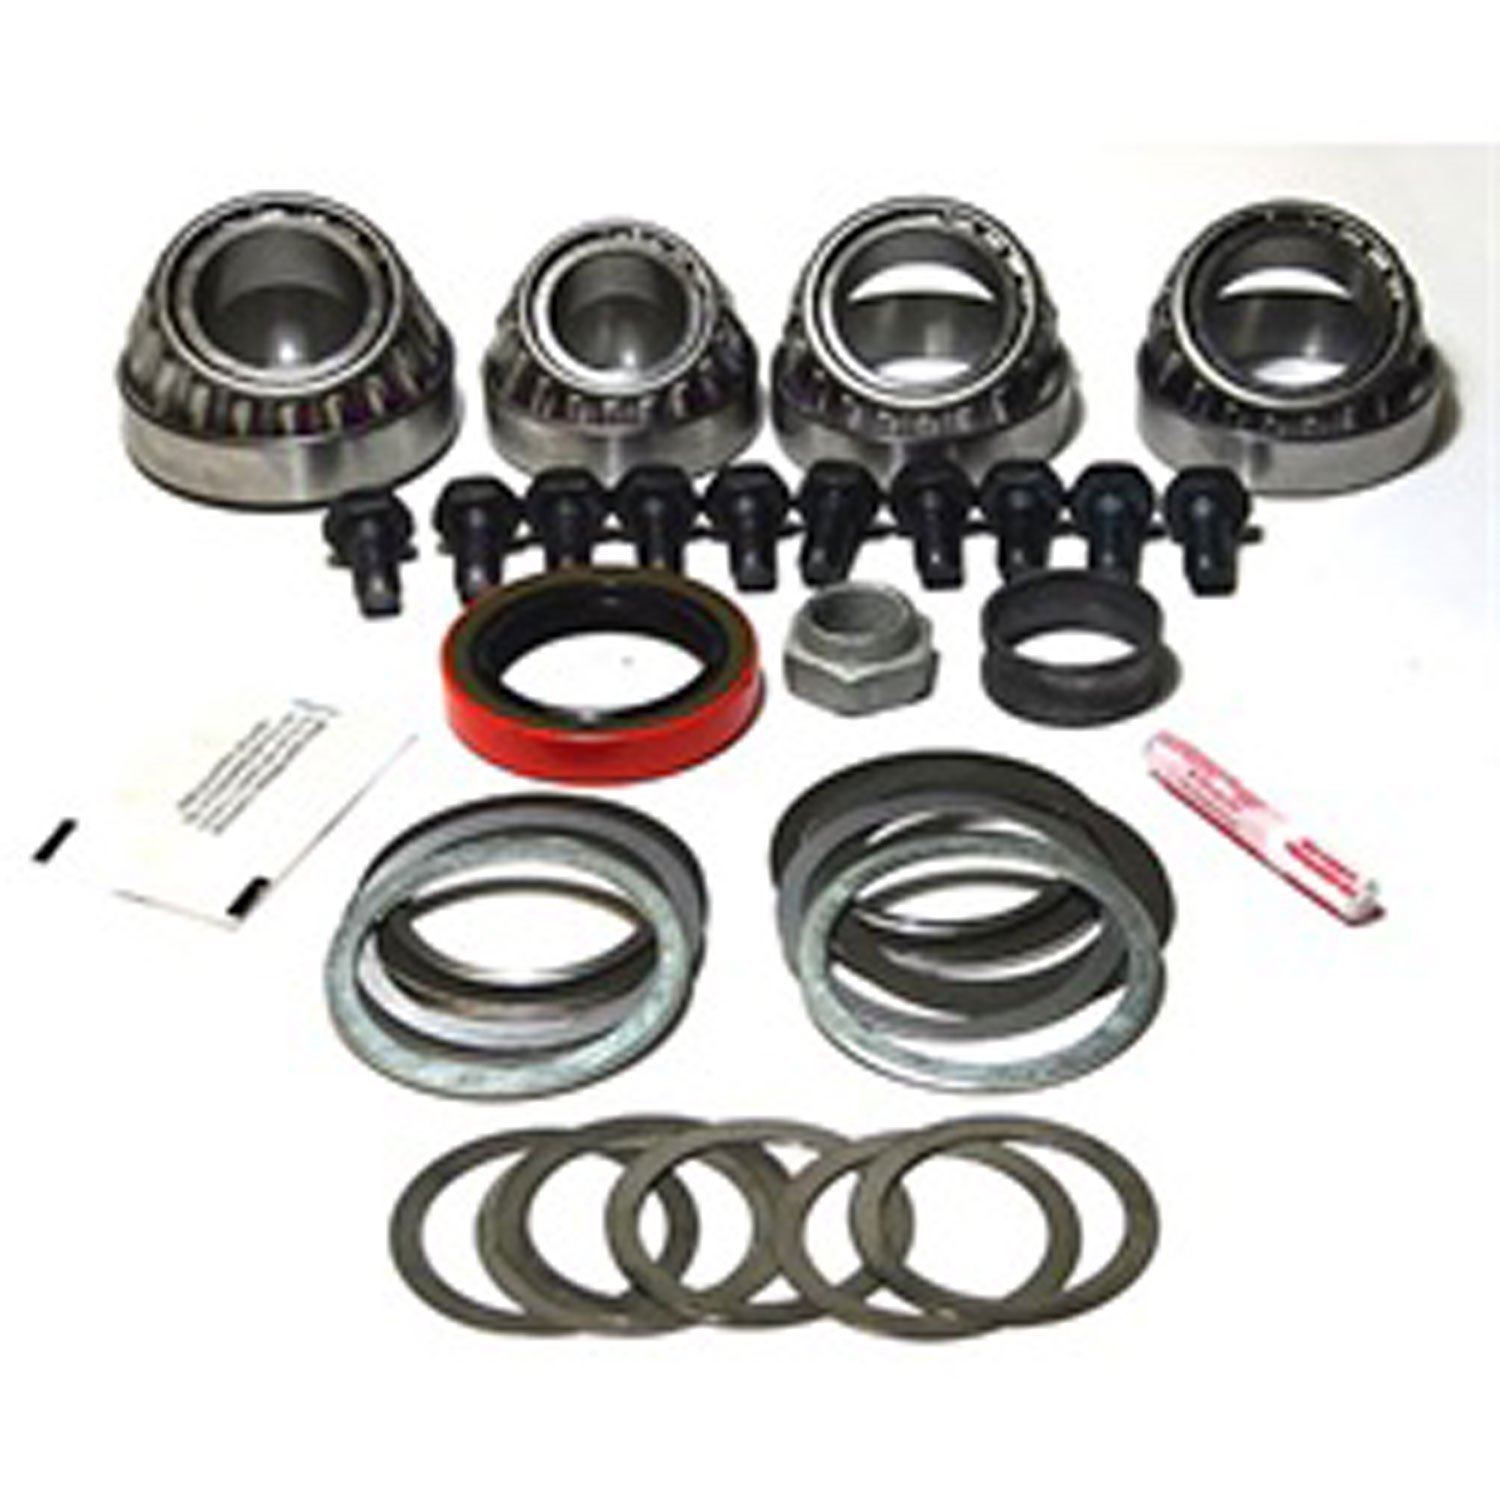 This differential rebuild kit for Dana 35 rear axles includes all bearings seals shims and hardware.